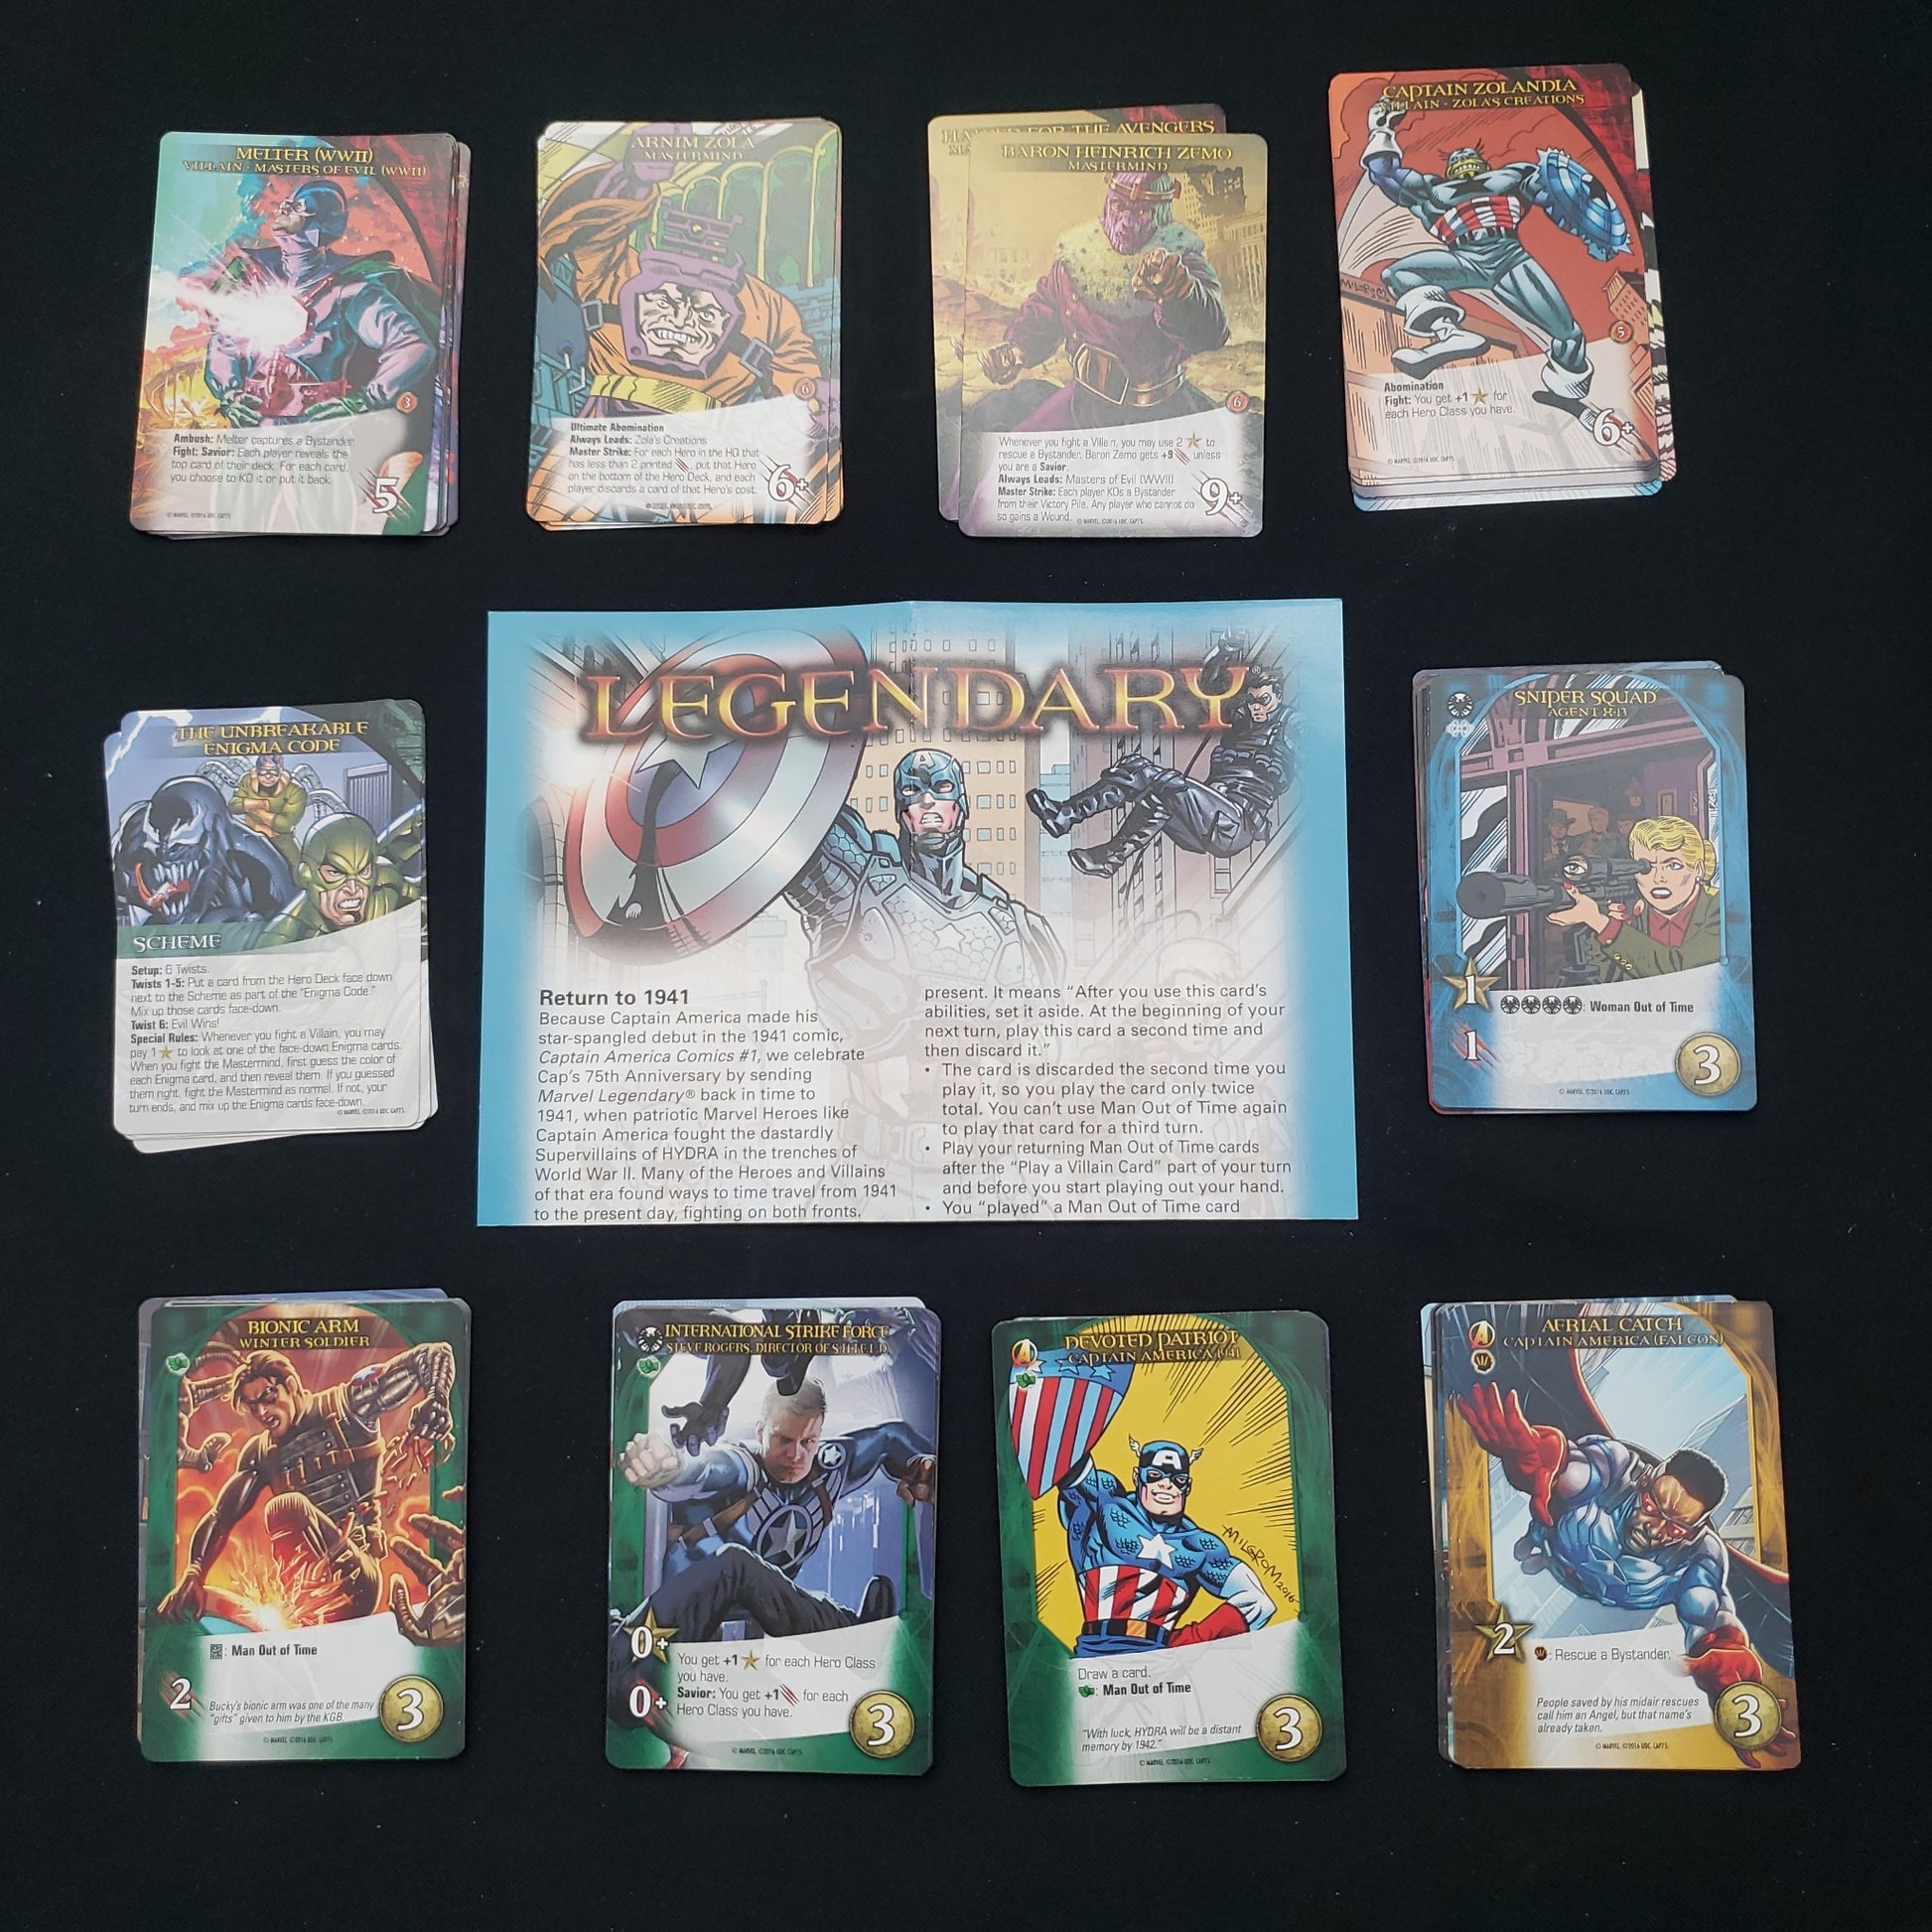 Image shows the instructions & cards arranged in stacks by card type for the Captain America 75th Anniversary expansion for the board game Legendary Marvel